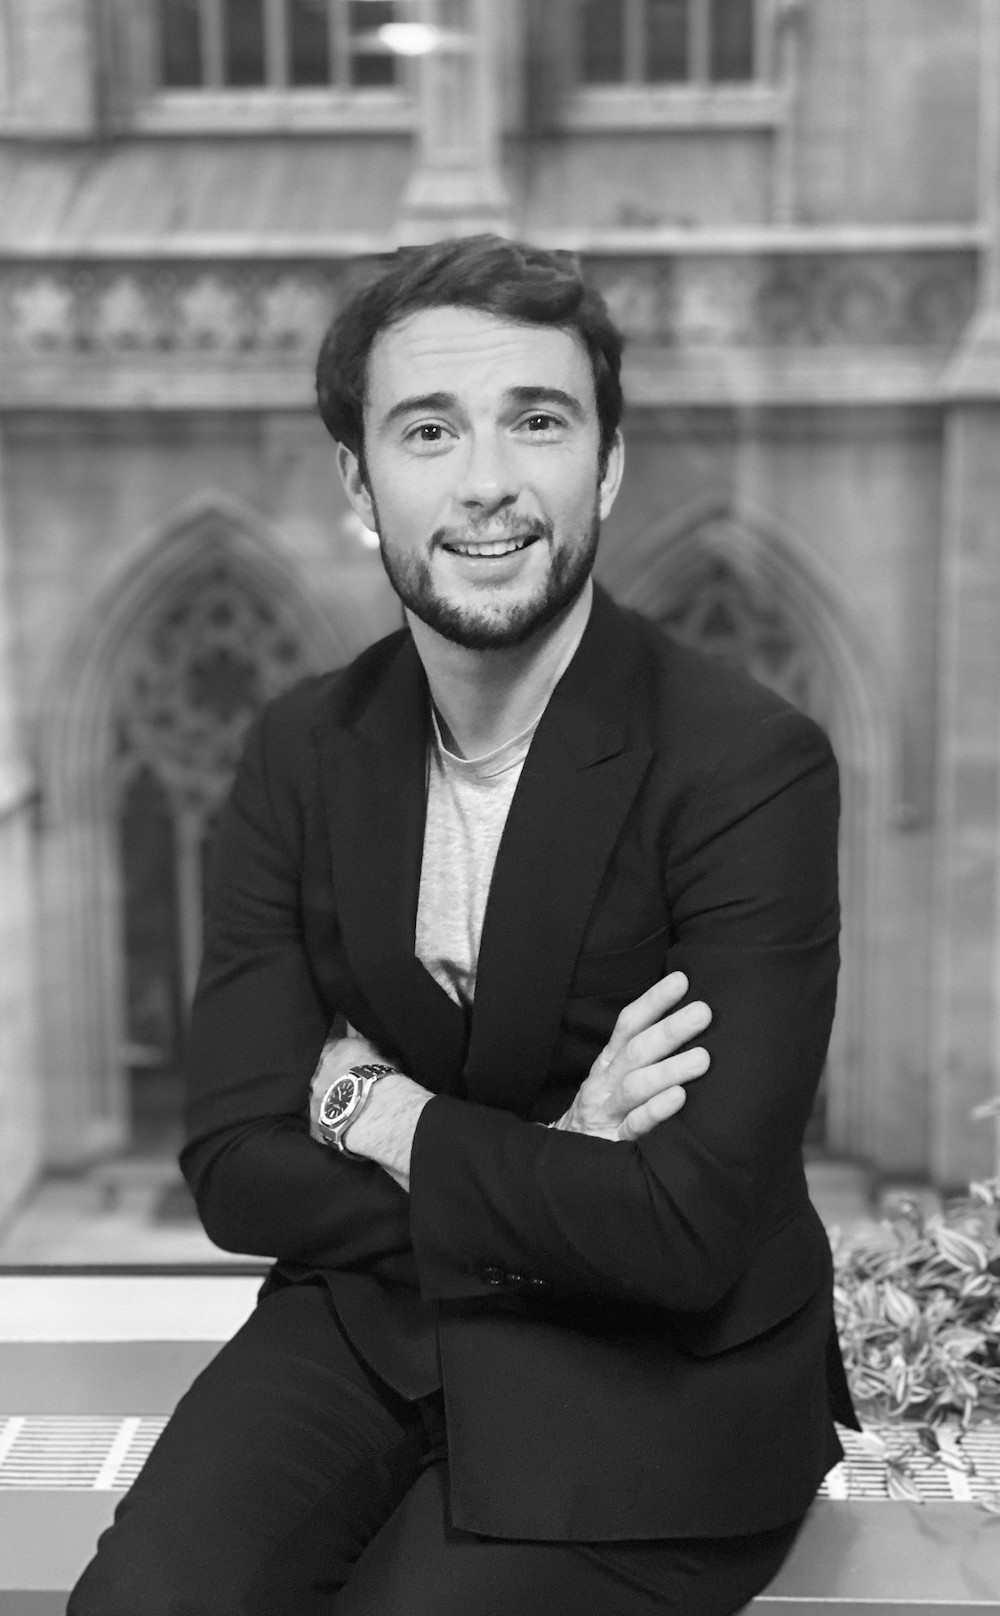 Haute Time Talks With Edouard Caumon, US Country Manager at Watchfinder & Co., About Creating Added Value, The Genderless Campaign And The Hottest Watches Of This Moment